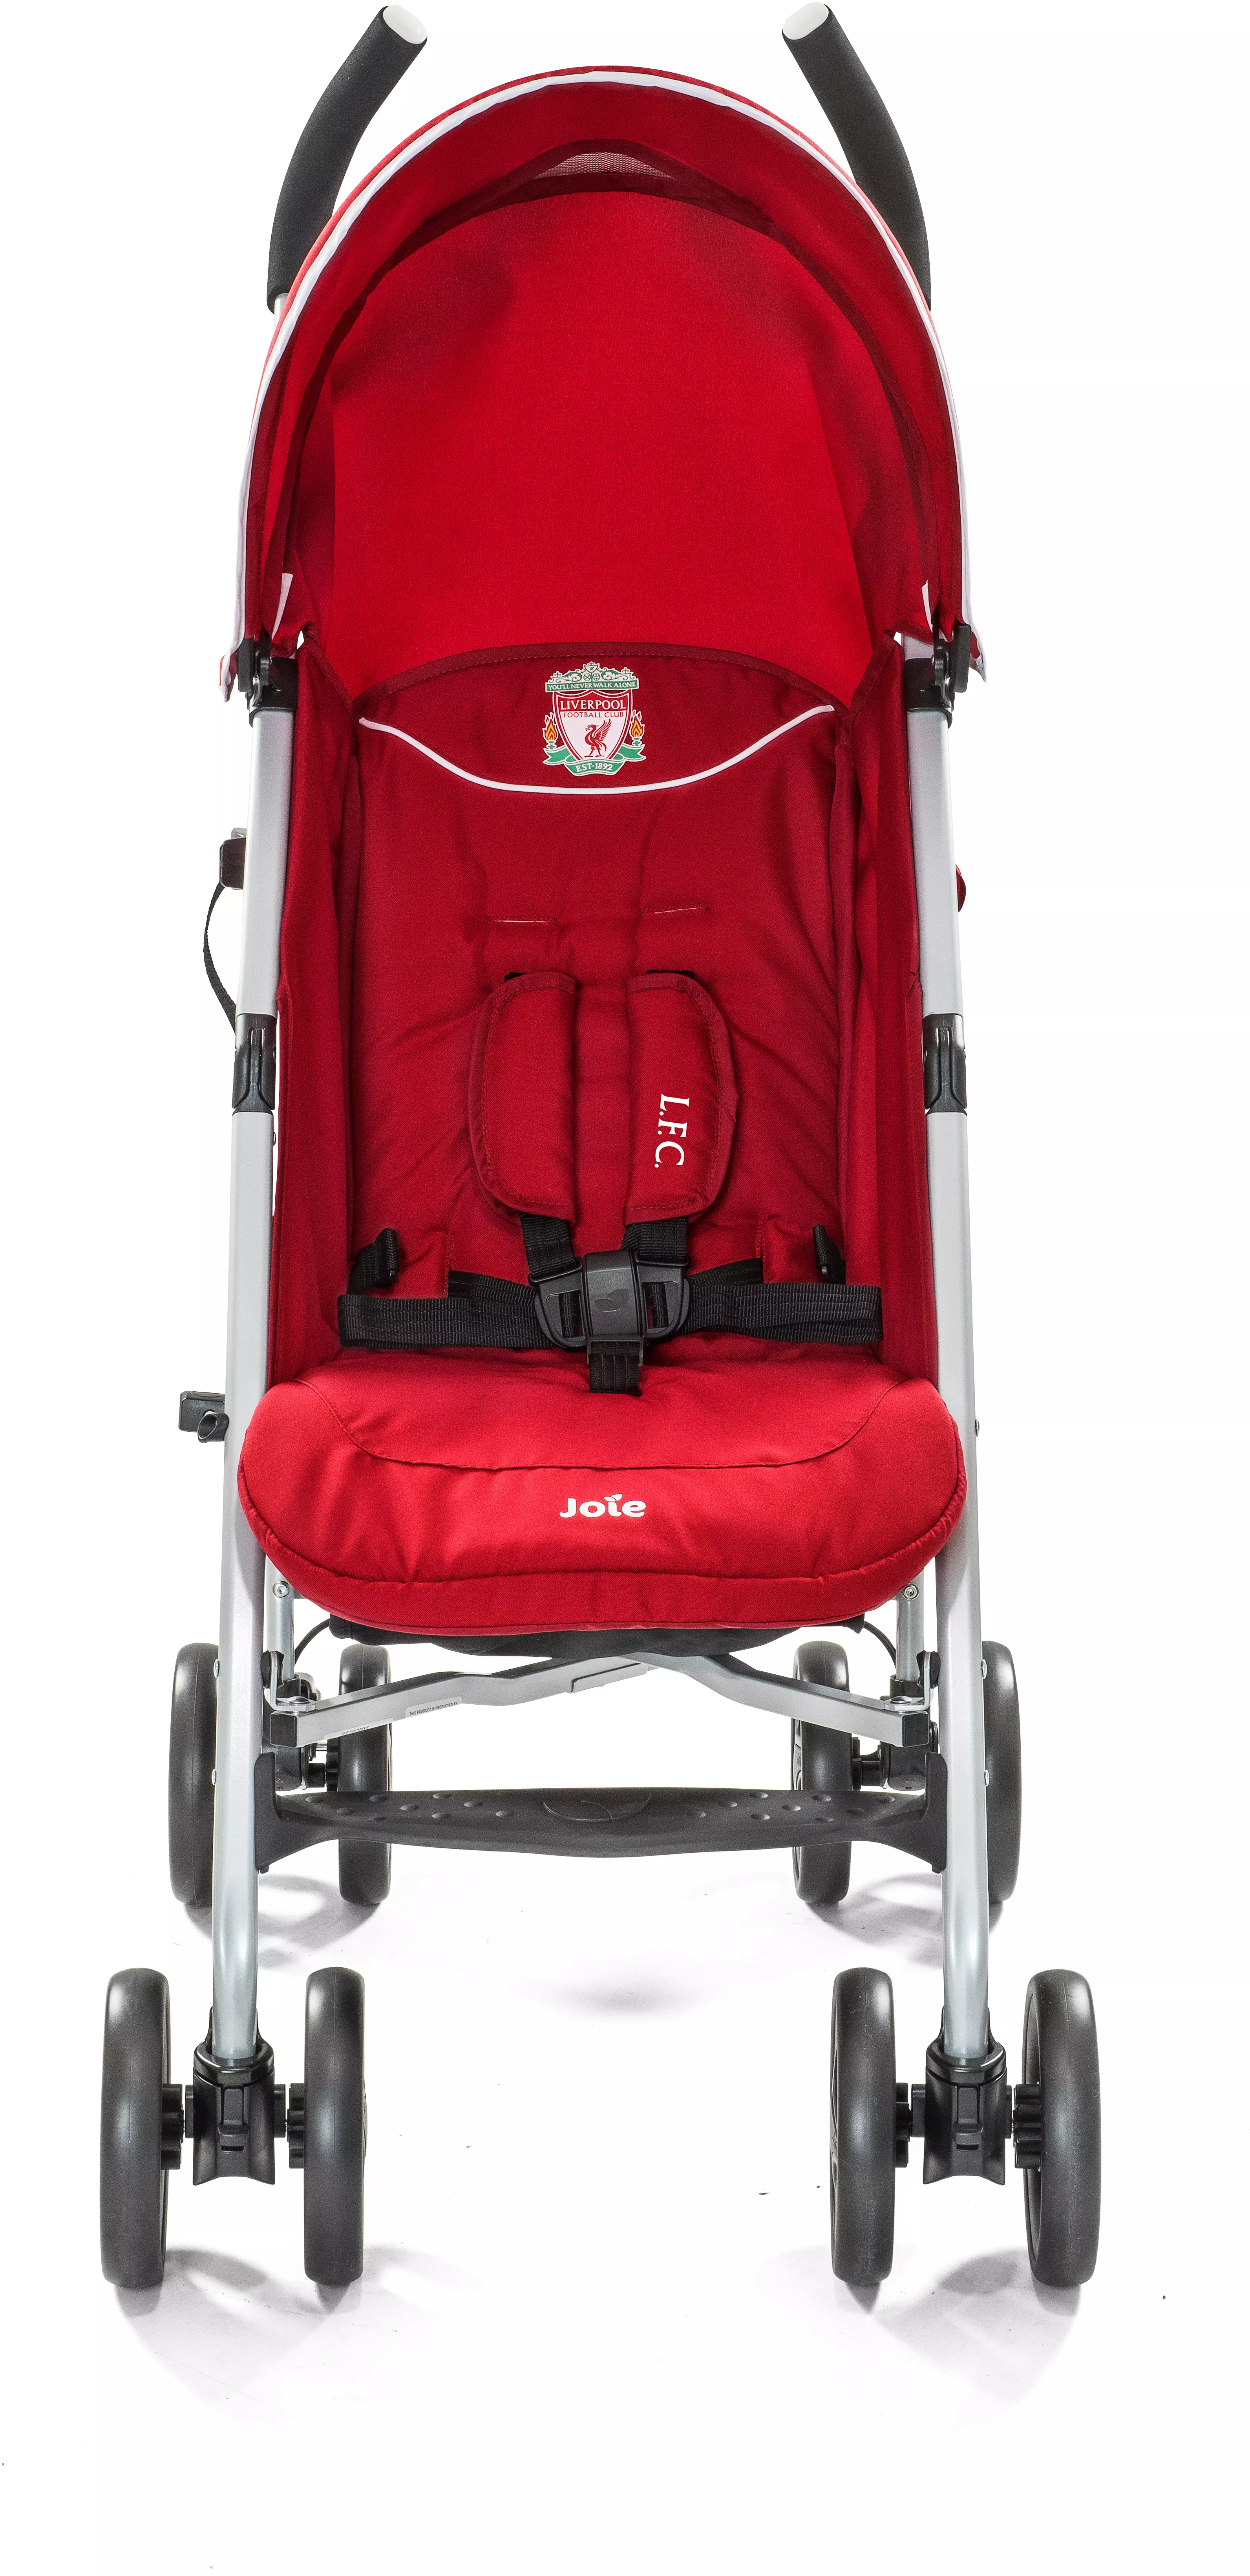 car strollers for toddlers